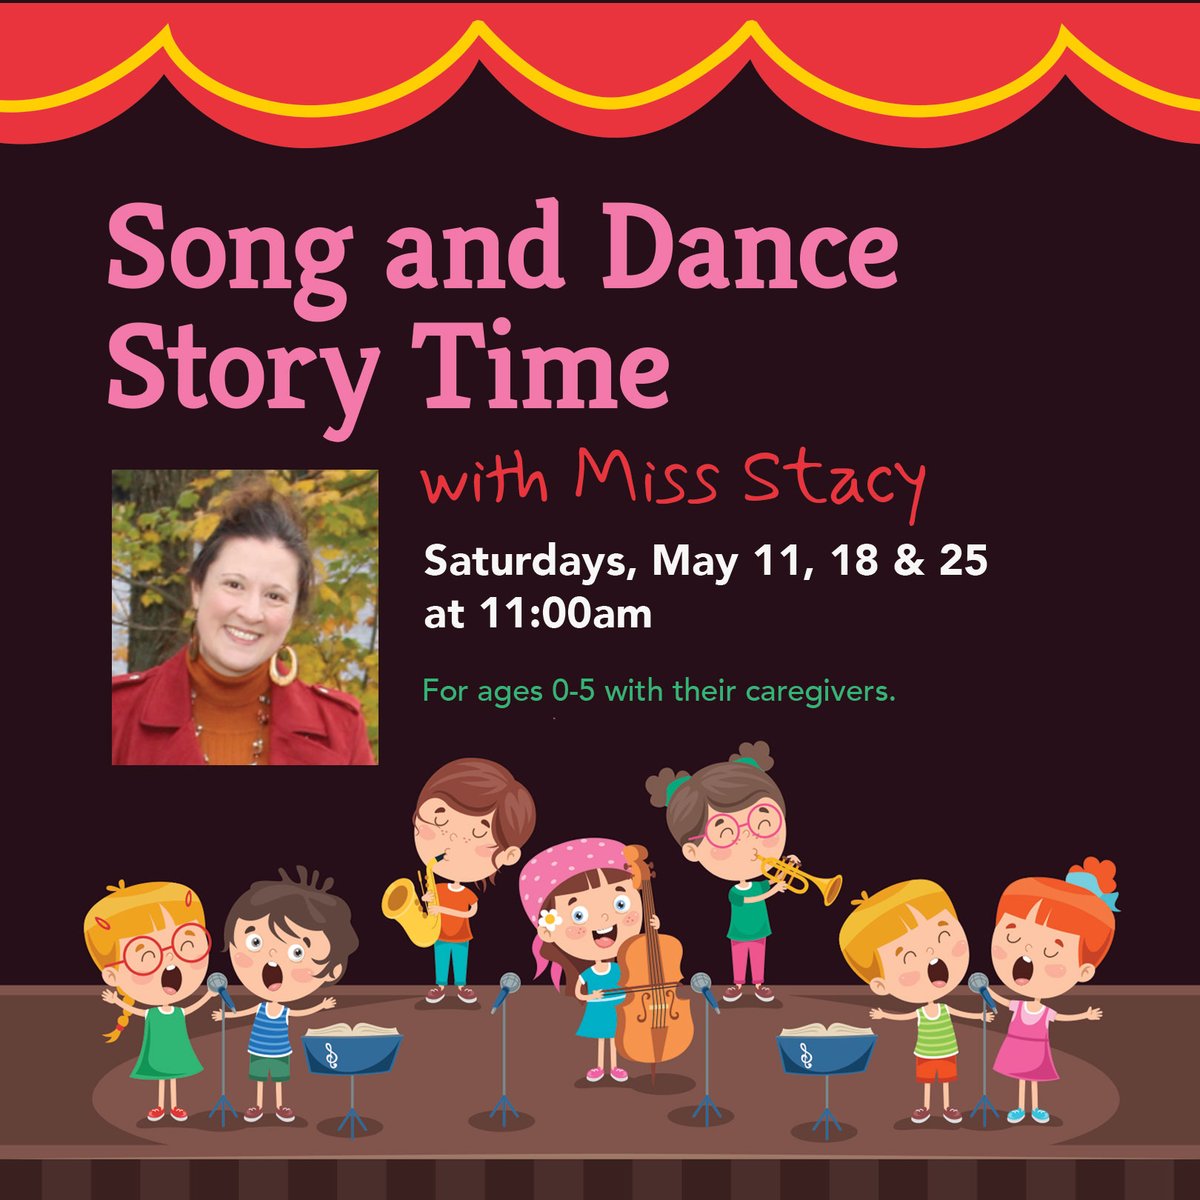 Join Miss Stacy as she brings a book to life through song and dance. The adventure will begin with a story and then we will explore it further with fun and active musical activities.

Visit our website to register.

#song #dance #reading #childrensprogram #hhﬂ #librariesrock